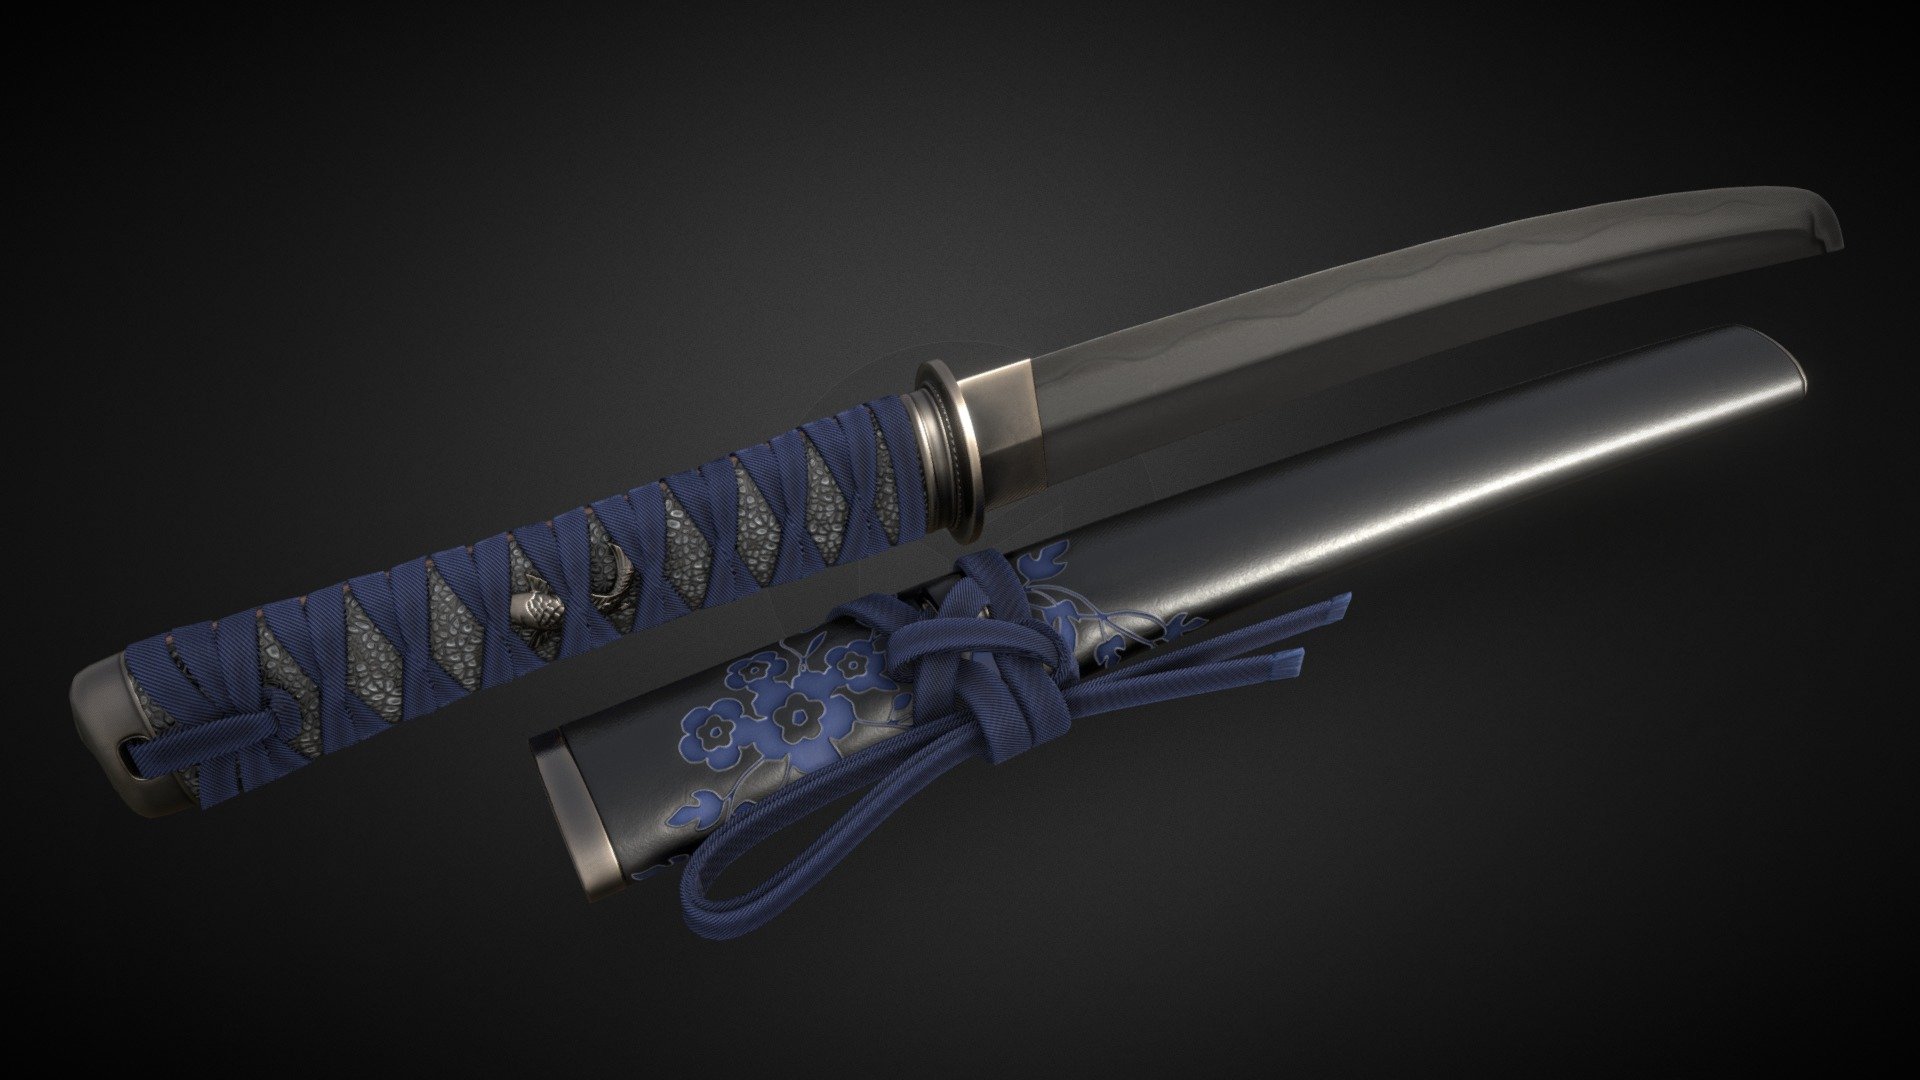 Tanto low poly model.

2k textures. Total polycount 12826 tris.

Model created on Blender and ZBrush. Textured with Substance Painter 3d model